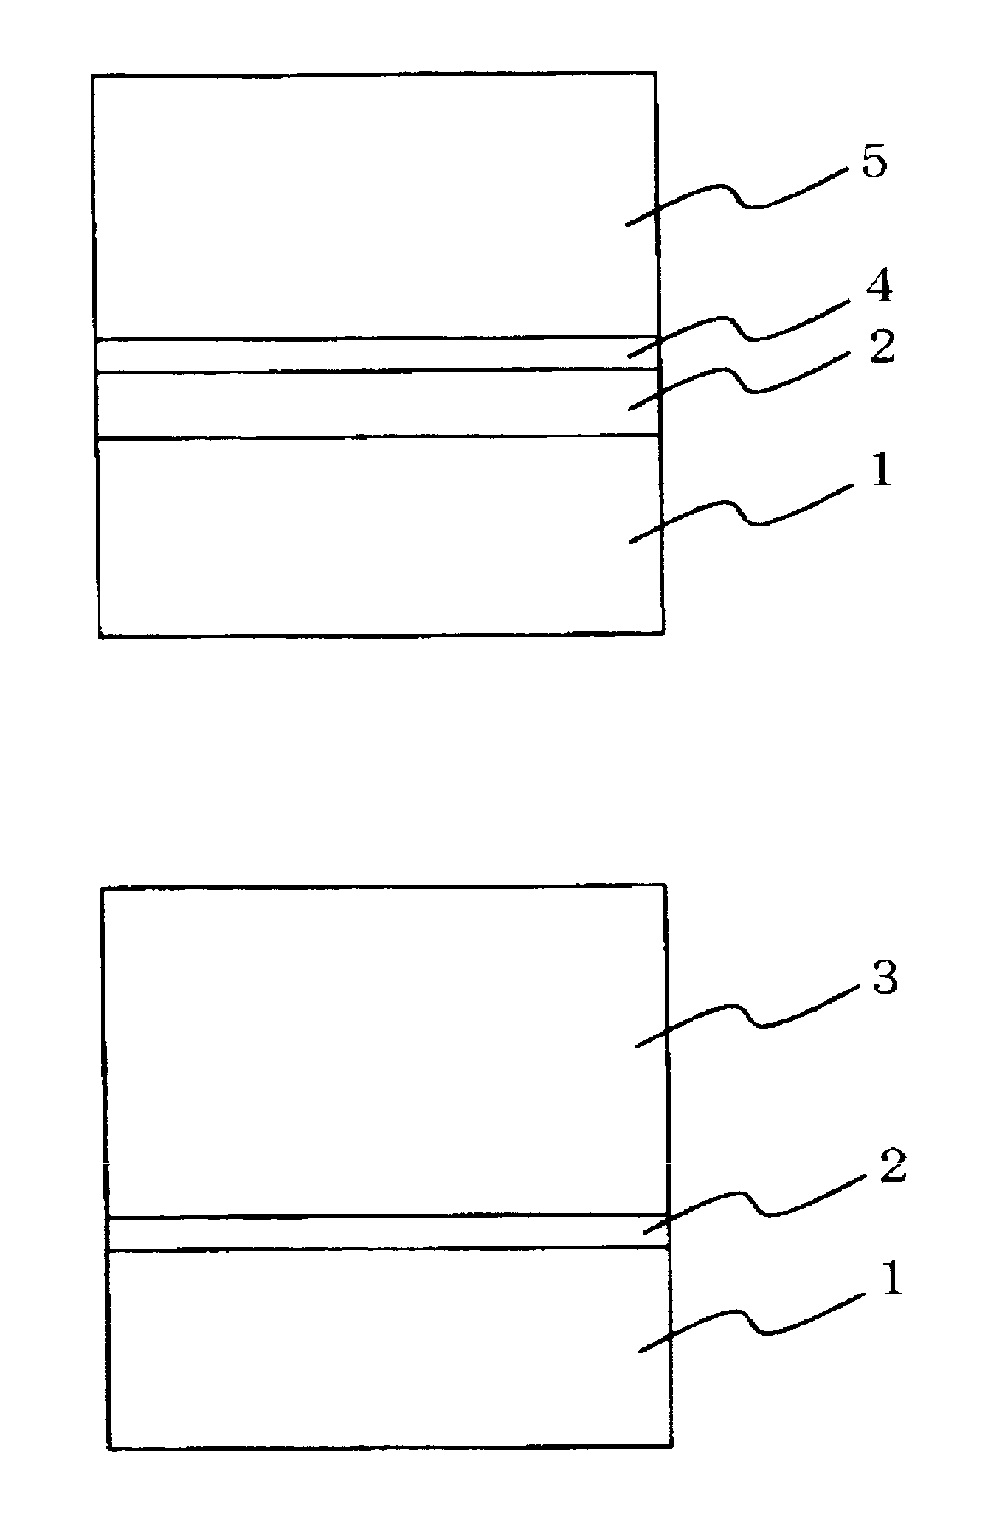 Electrophotographic photoreceptor, method for producing the same, and electrophotographic device including the same